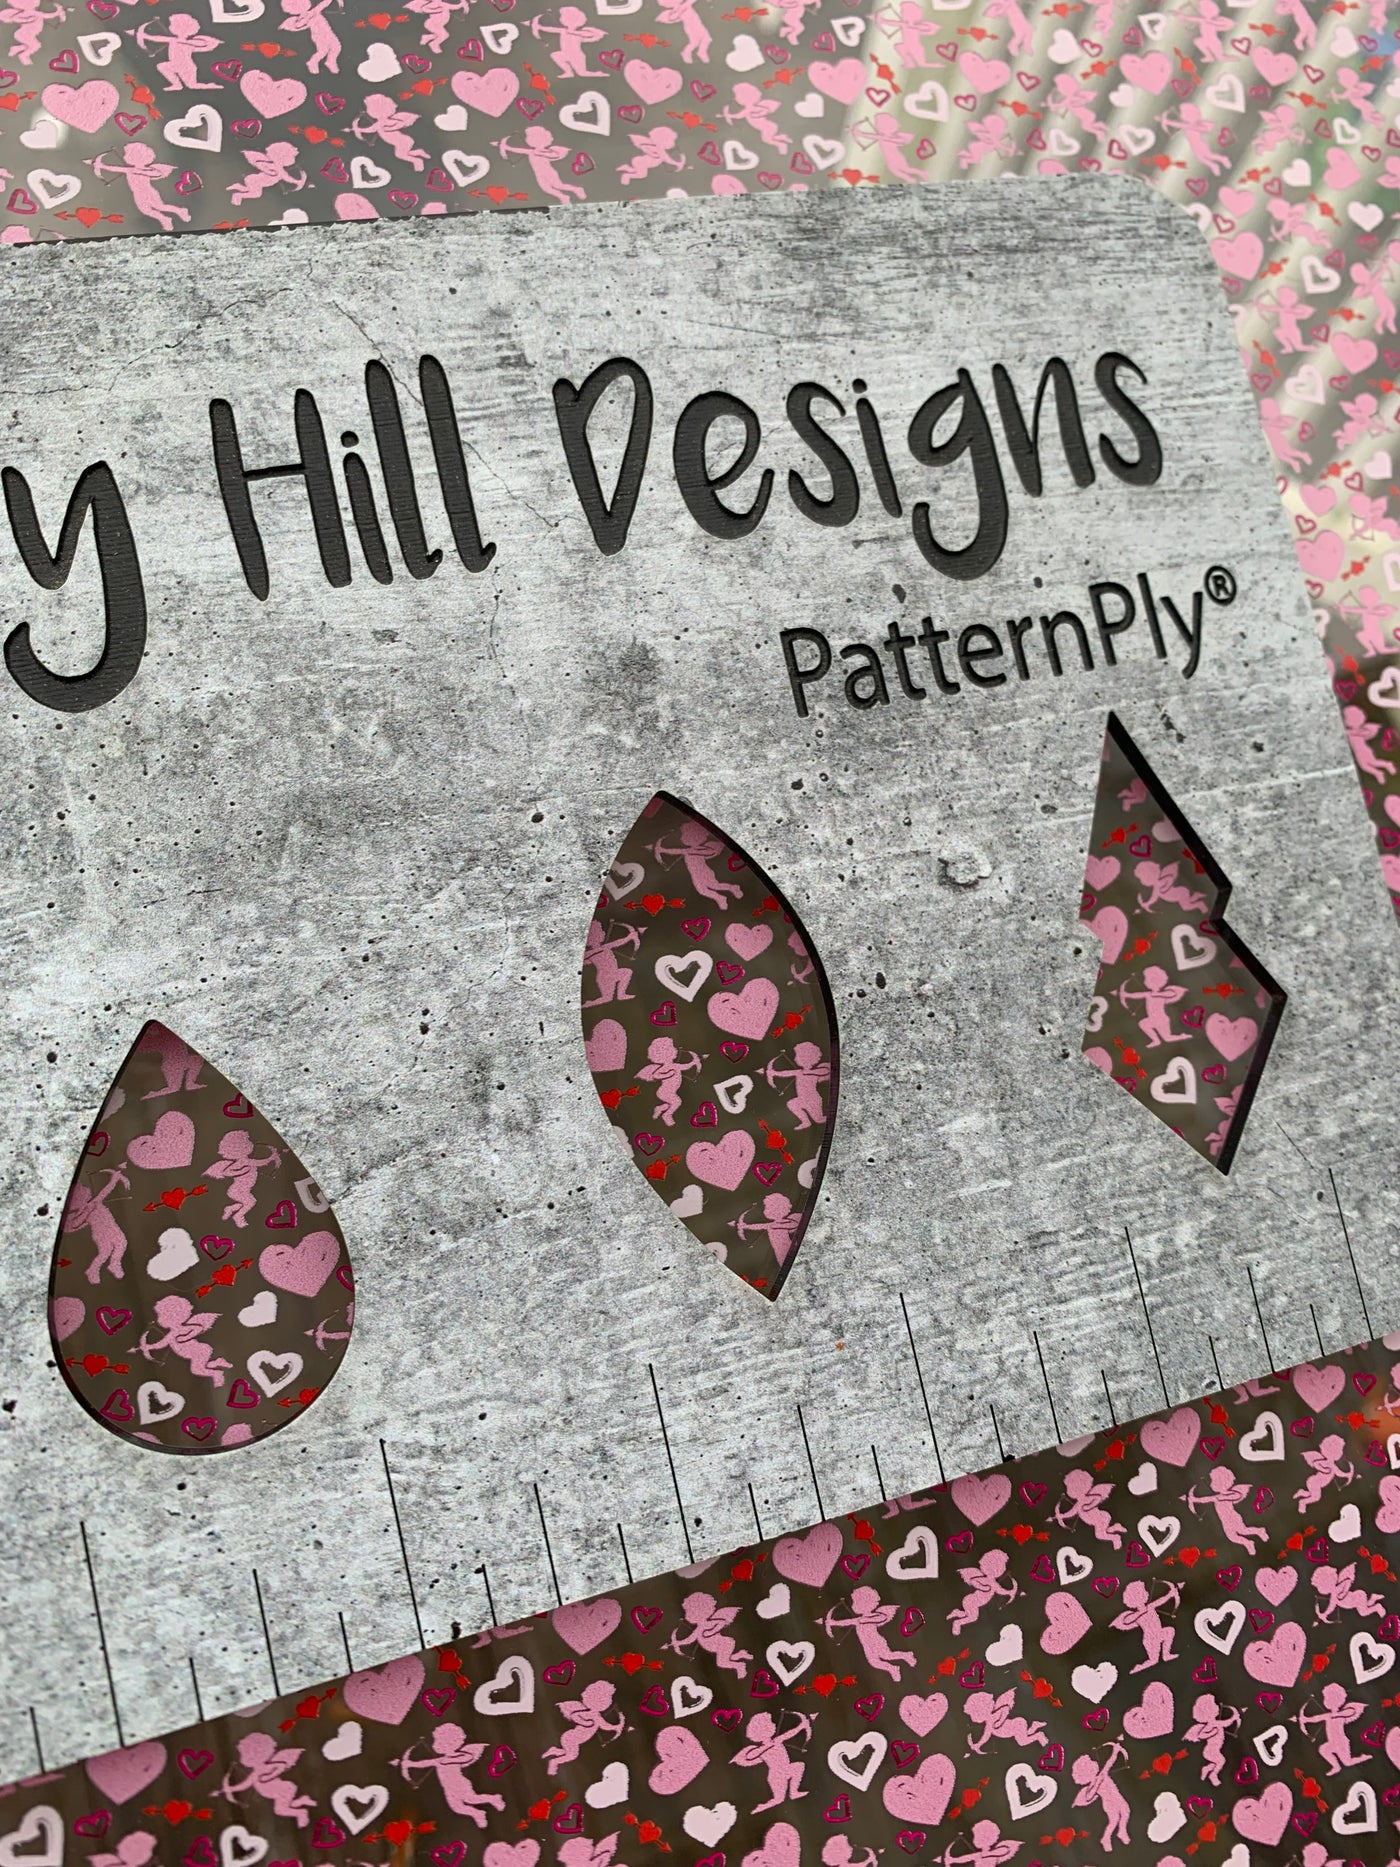 PatternPly® Scattered Sketched Cupids and Hearts